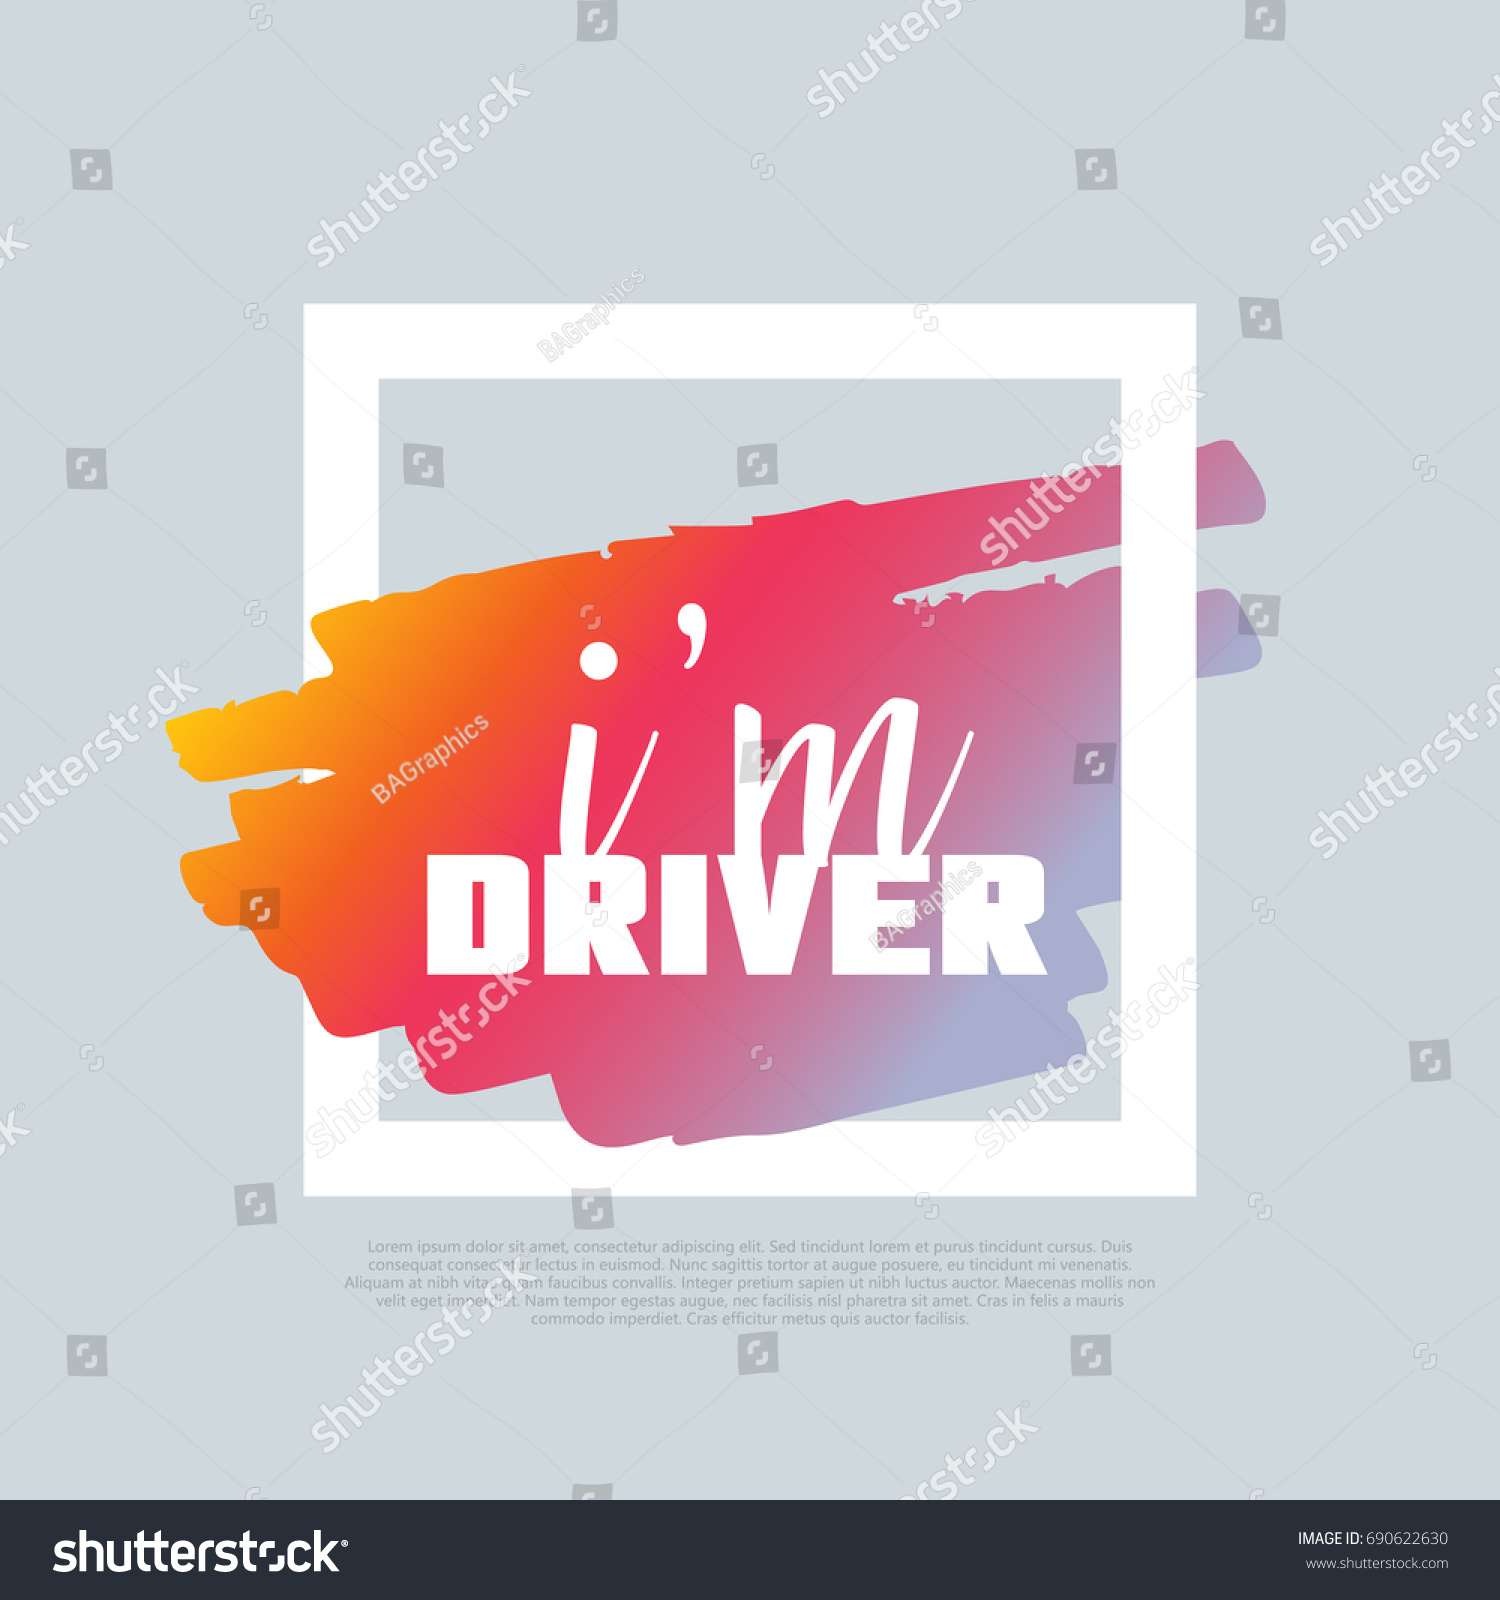 SVG of I'm Driver. Vector clip-art template, poster design. Motto, label, text. Compatible wtih PNG, JPG, AI, CDR, SVG, PDF and EPS. svg